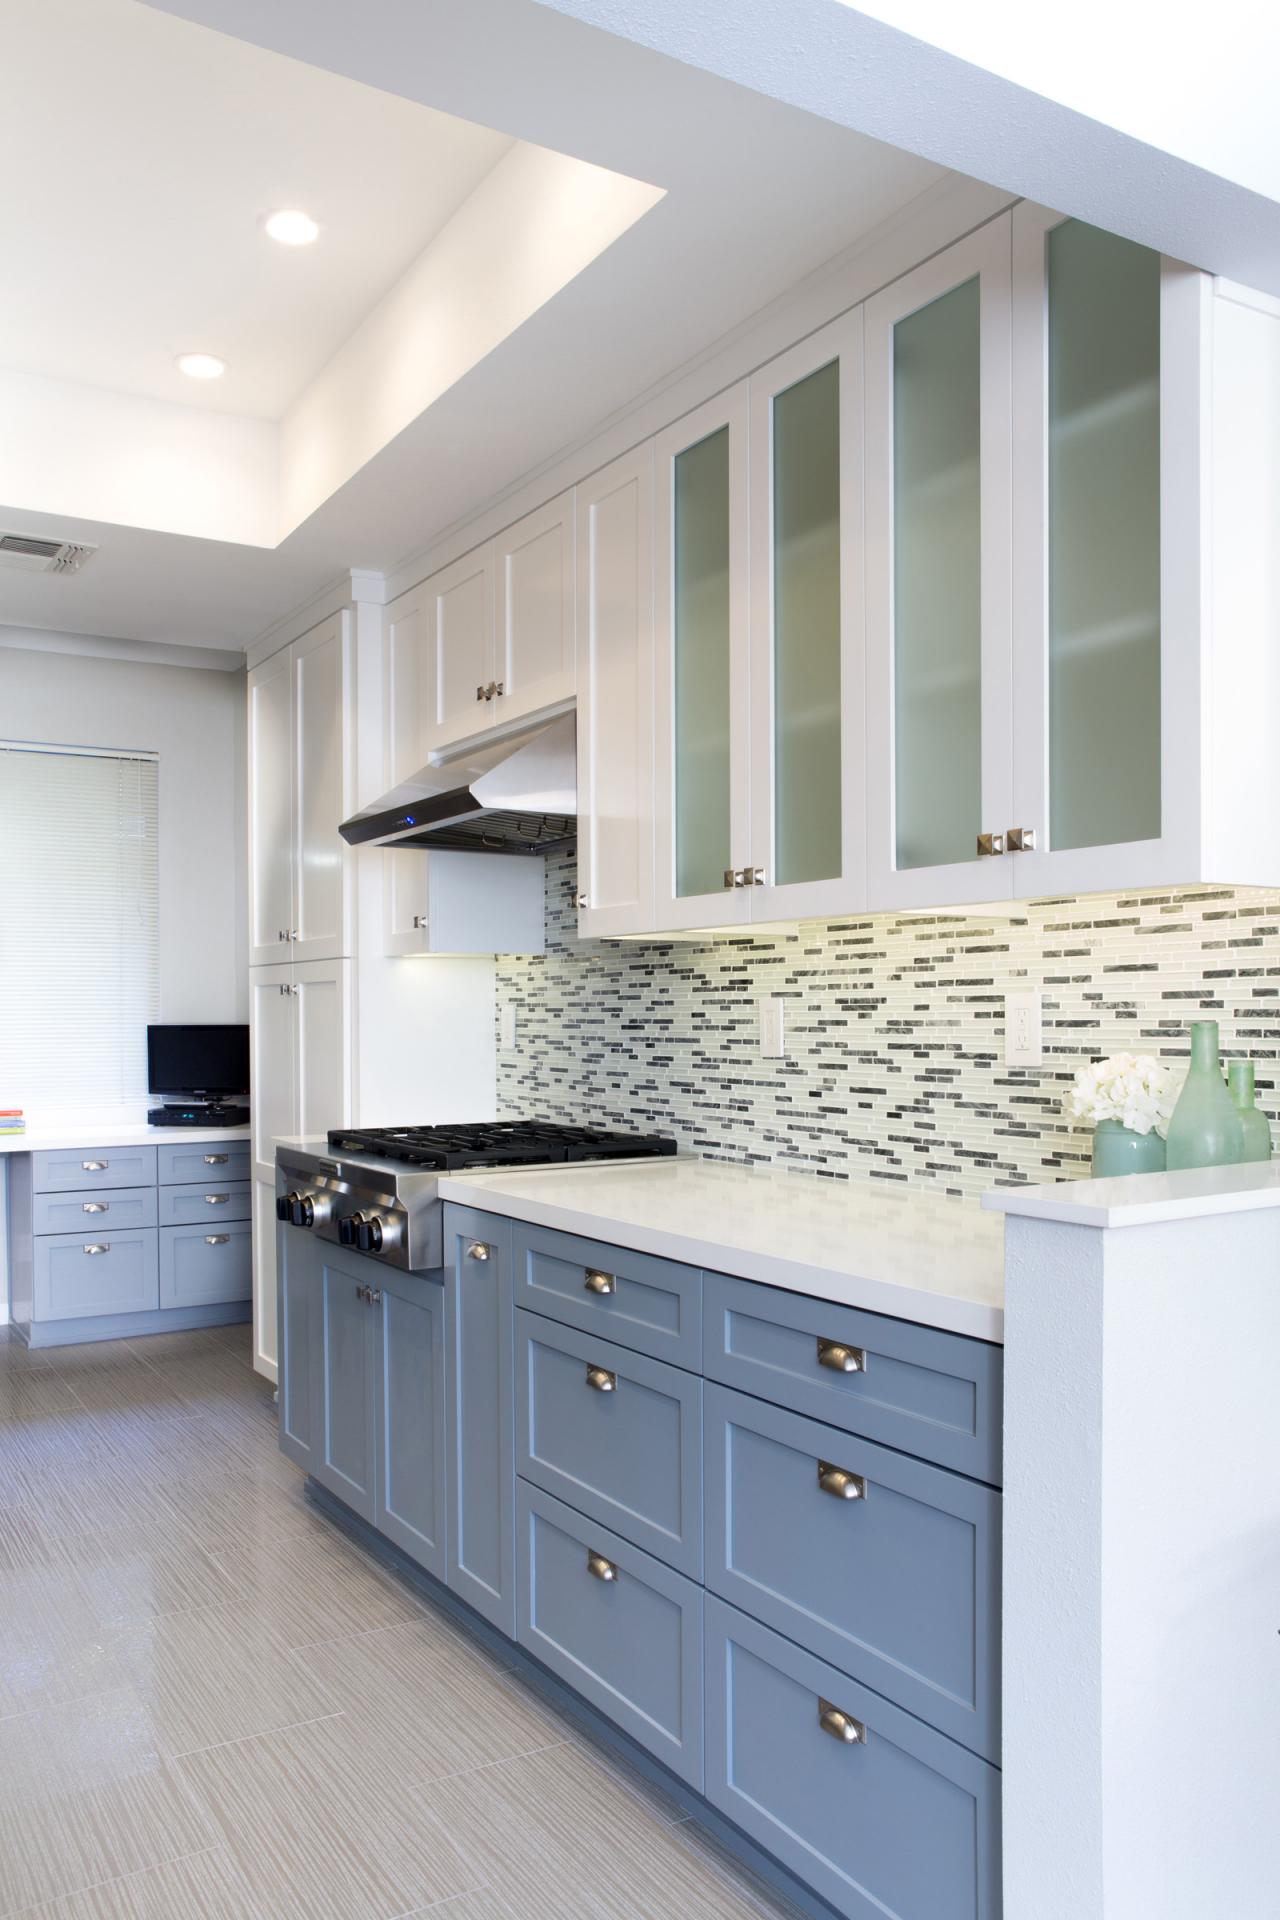 Tone Kitchen In Two Tone Kitchen Cabinets Design In White Color Ideas Using Contemporary Style Completed With Mosaic Kitchen Backsplash Design Kitchen Two Toned Kitchen Cabinets As Contemporary Inspiration Kitchen Design